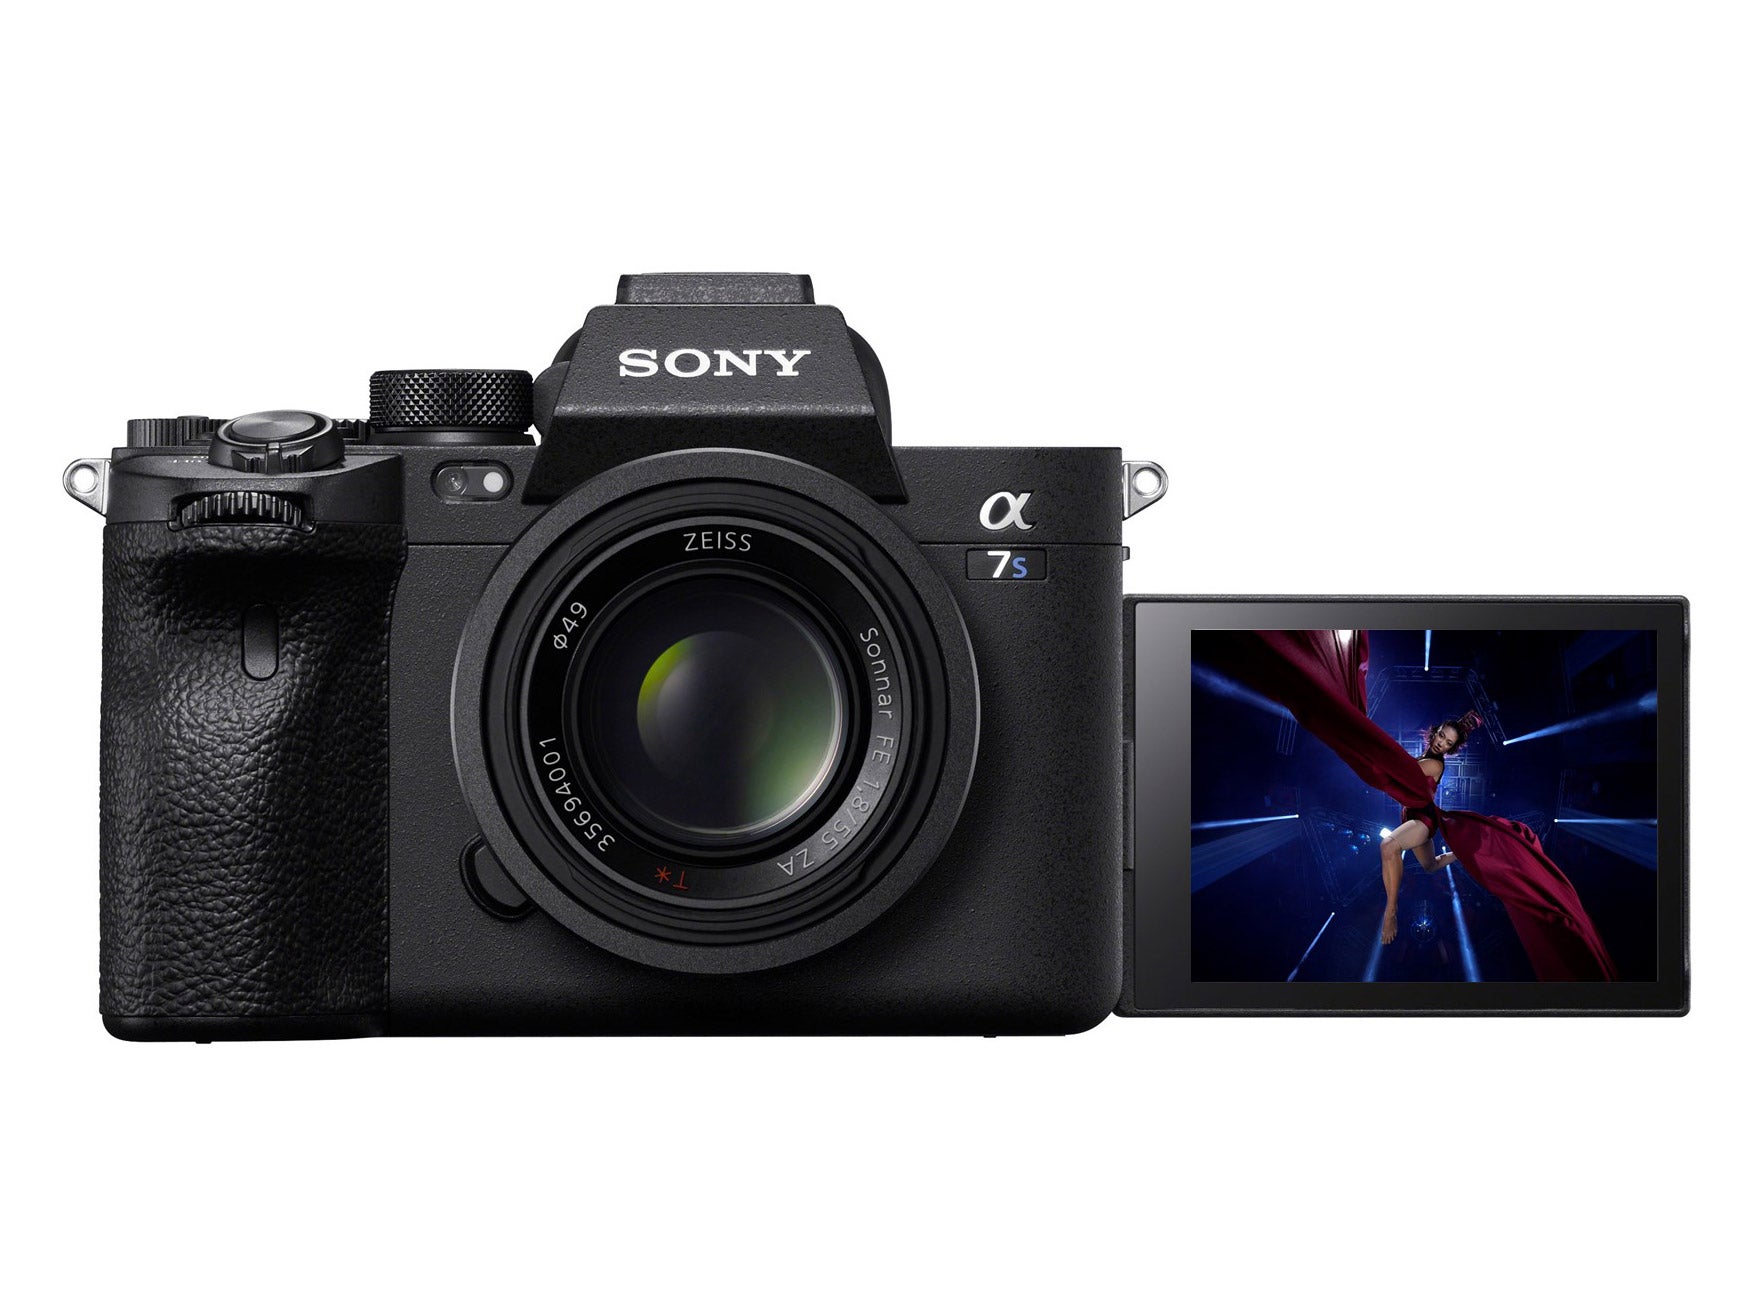 Sony's long-awaited A7S III is built for shooting high-res video